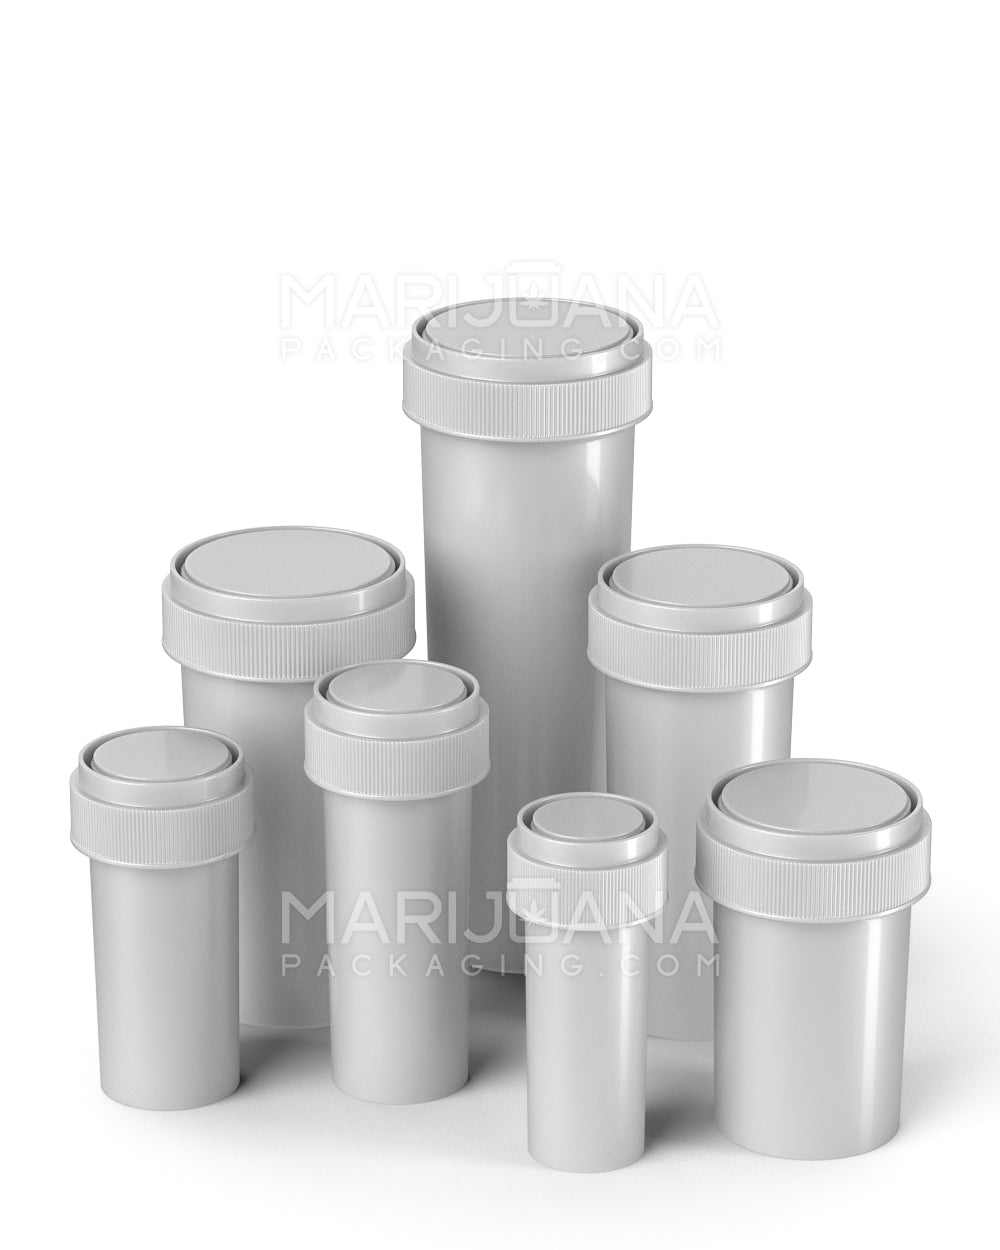 Child Resistant | Opaque Silver Blank Reversible Cap Vials | 20dr - 3.5g - 240 Count - 10